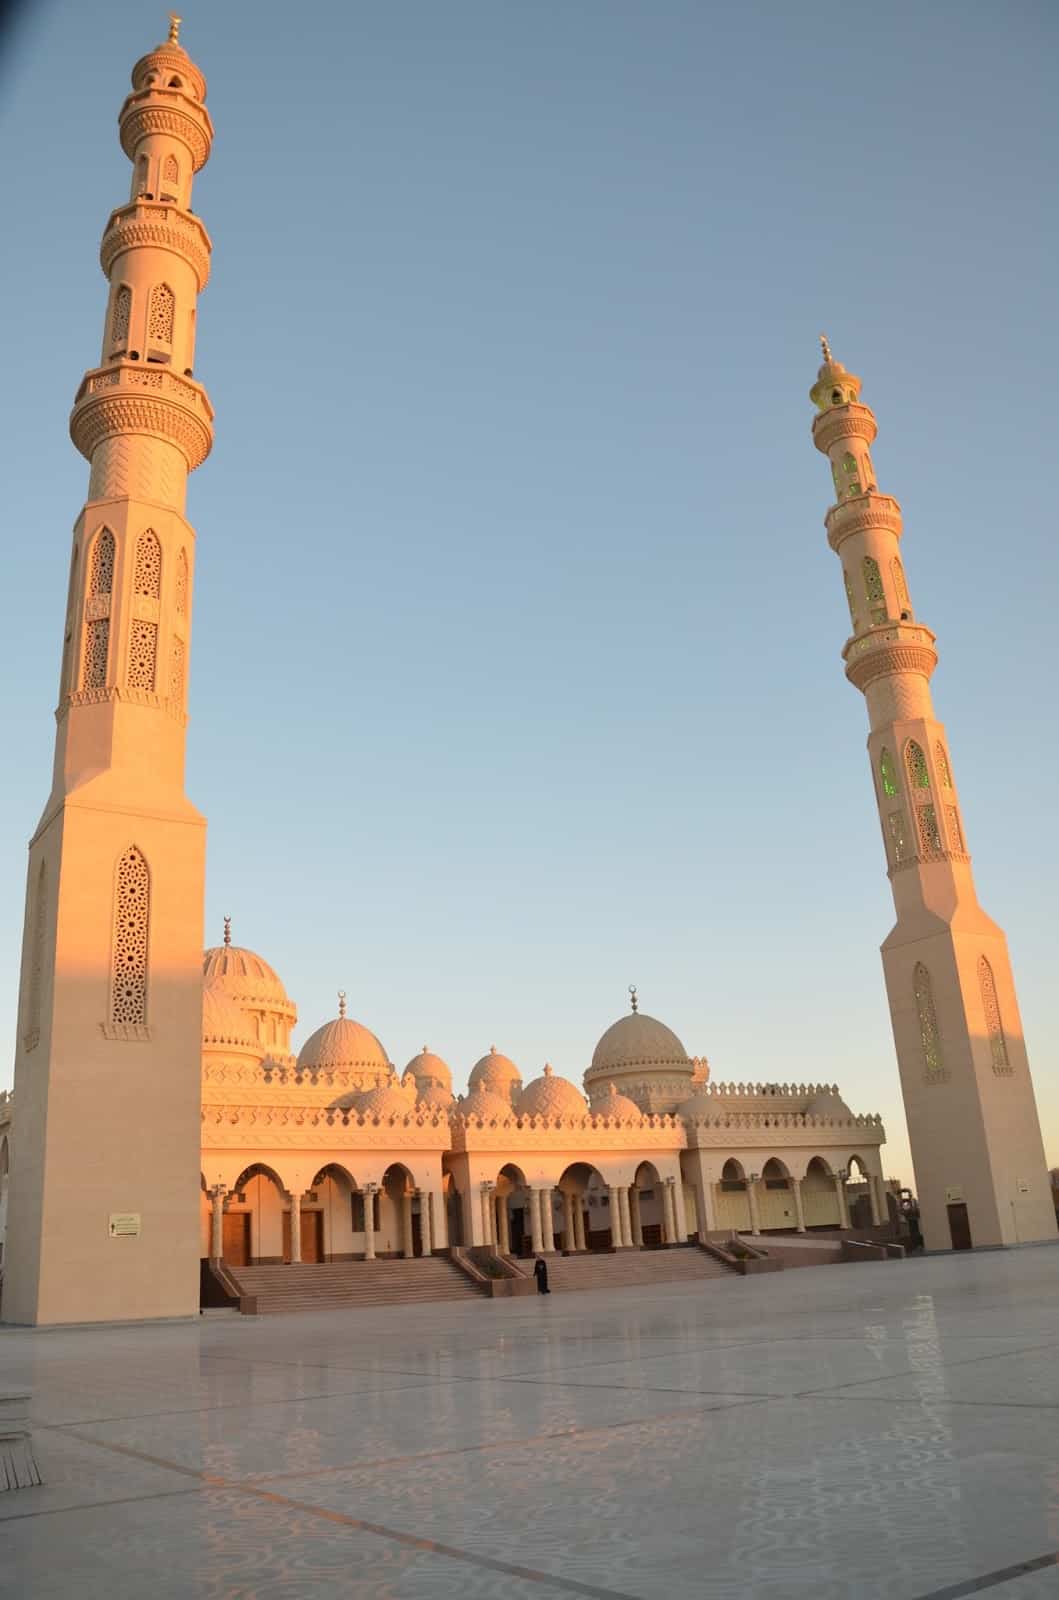 Mosque in Hurghada, Egypt